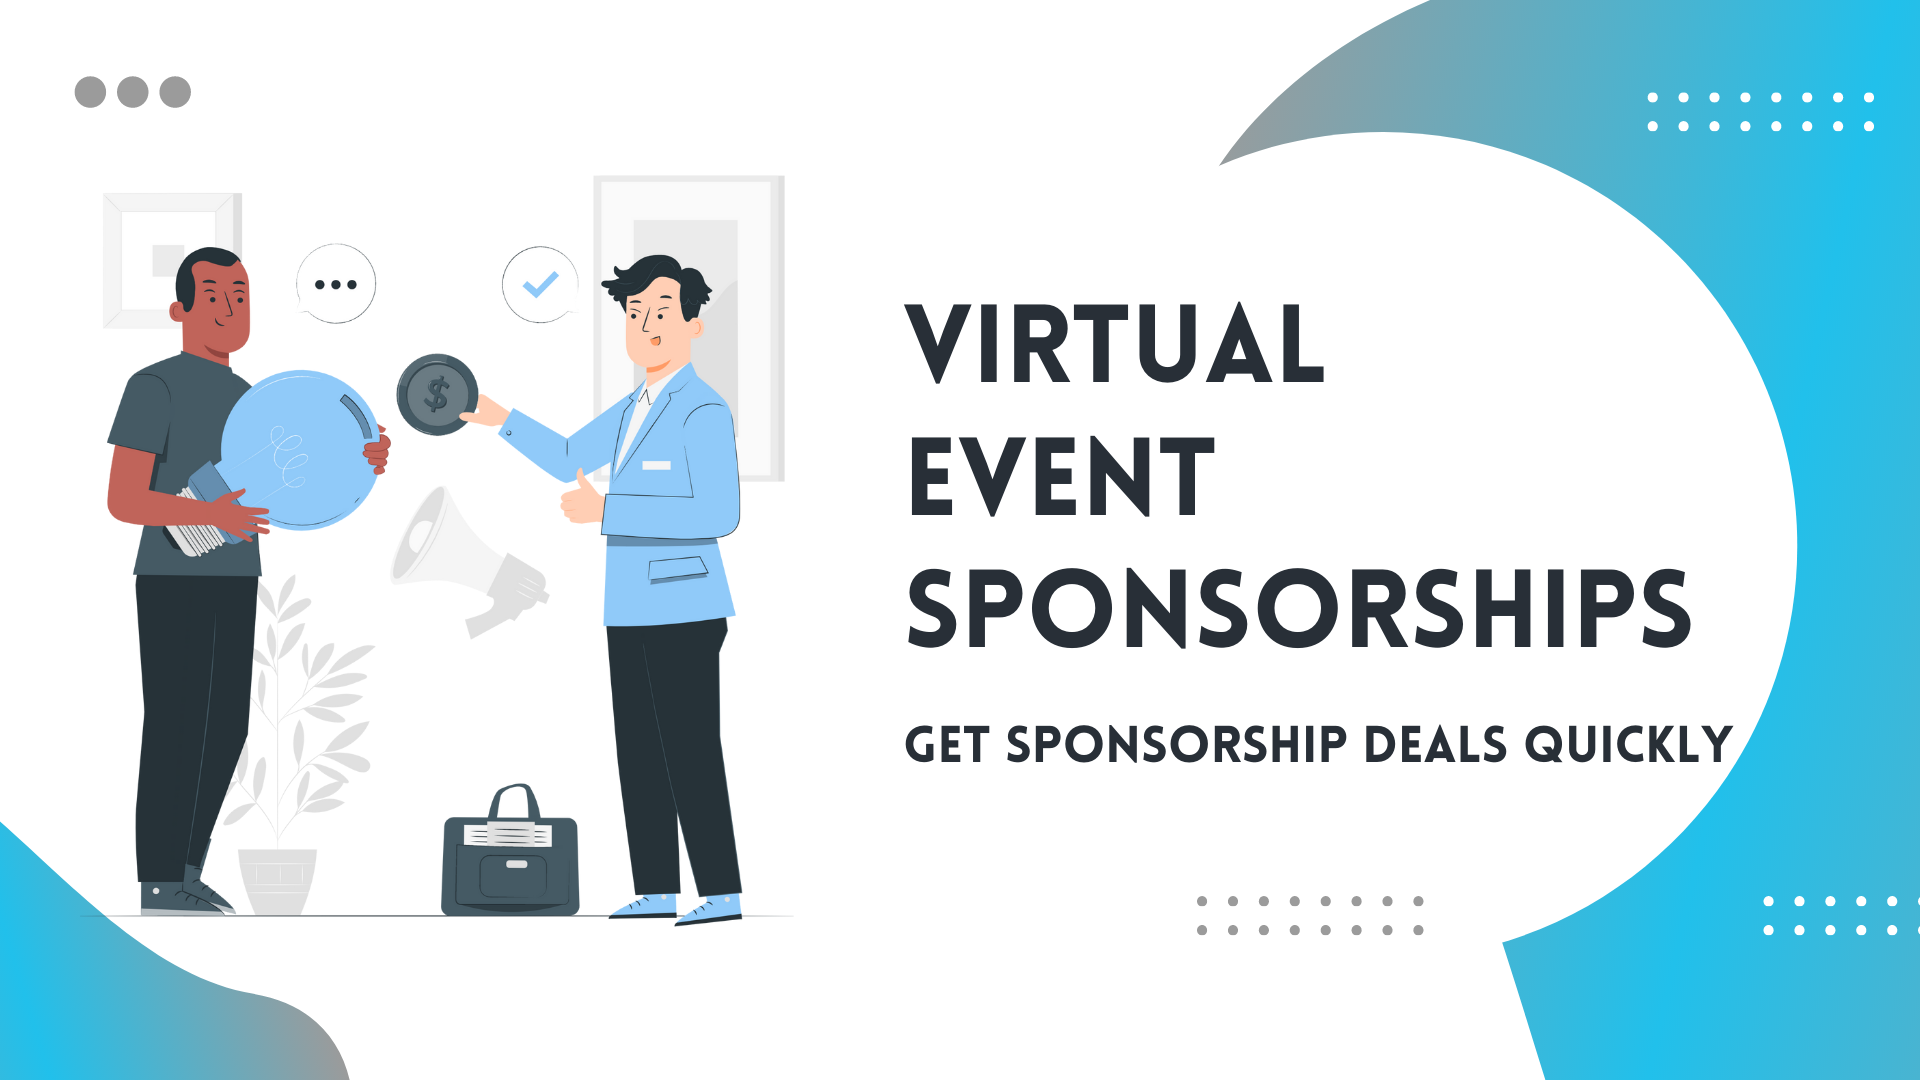 Virtual Event Sponsorship Ideas to Get Sponsorship Deals Quickly